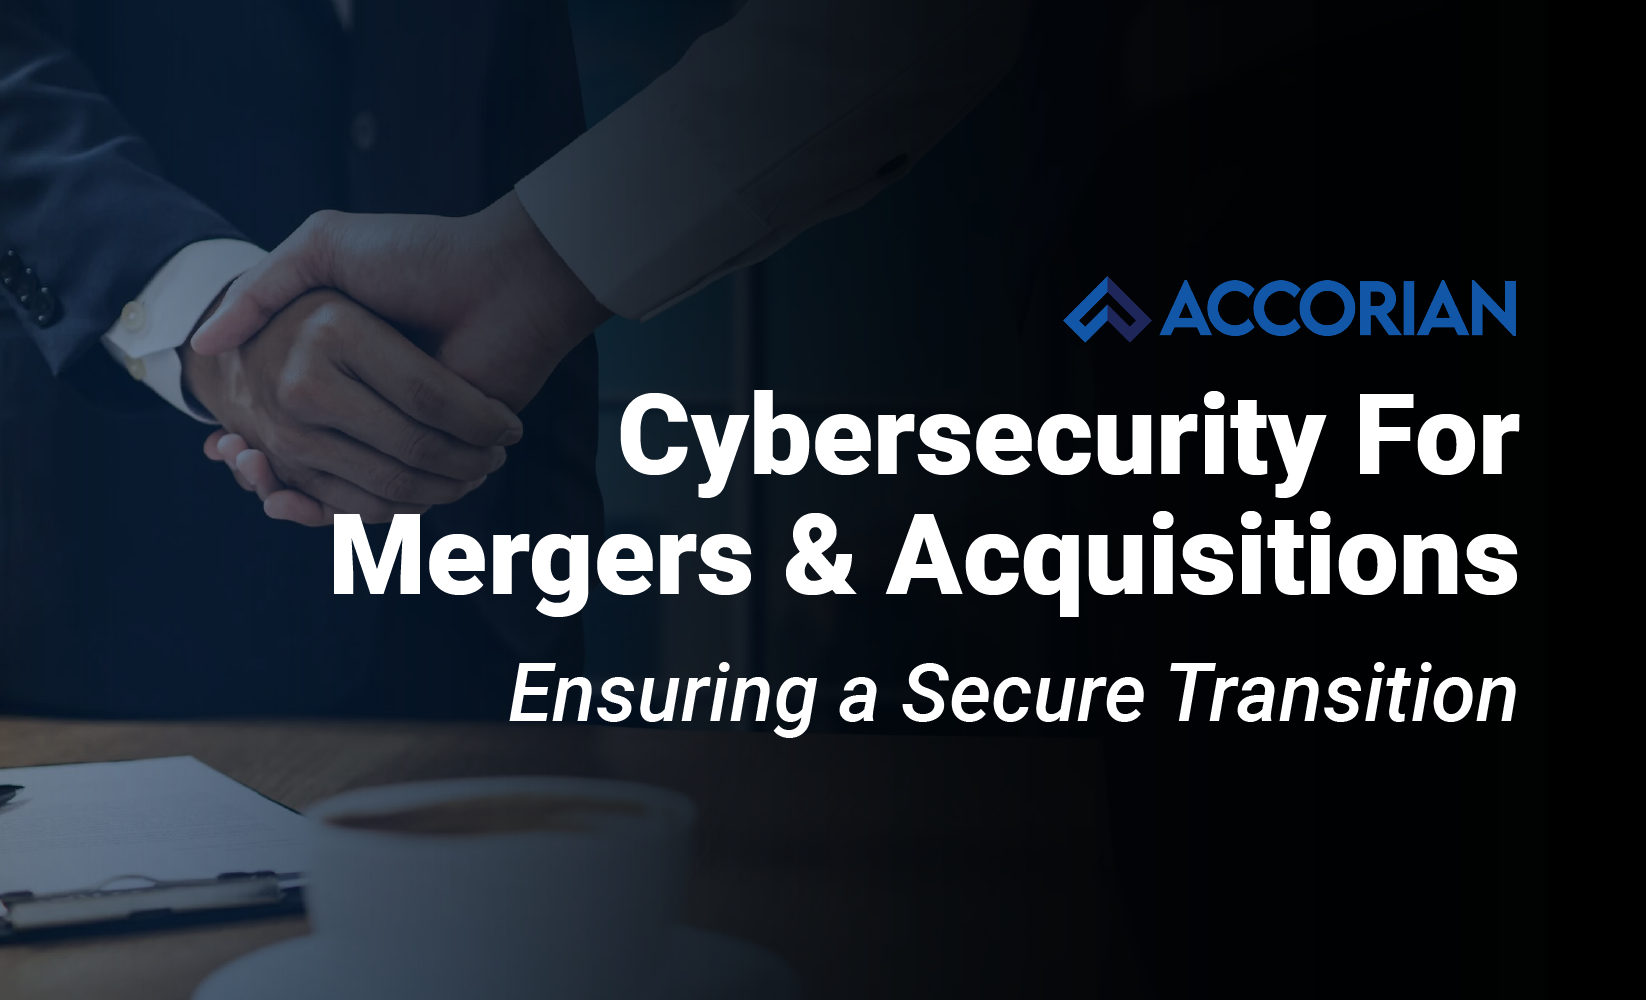 CYBERSECURITY FOR MERGERS & ACQUISITIONS